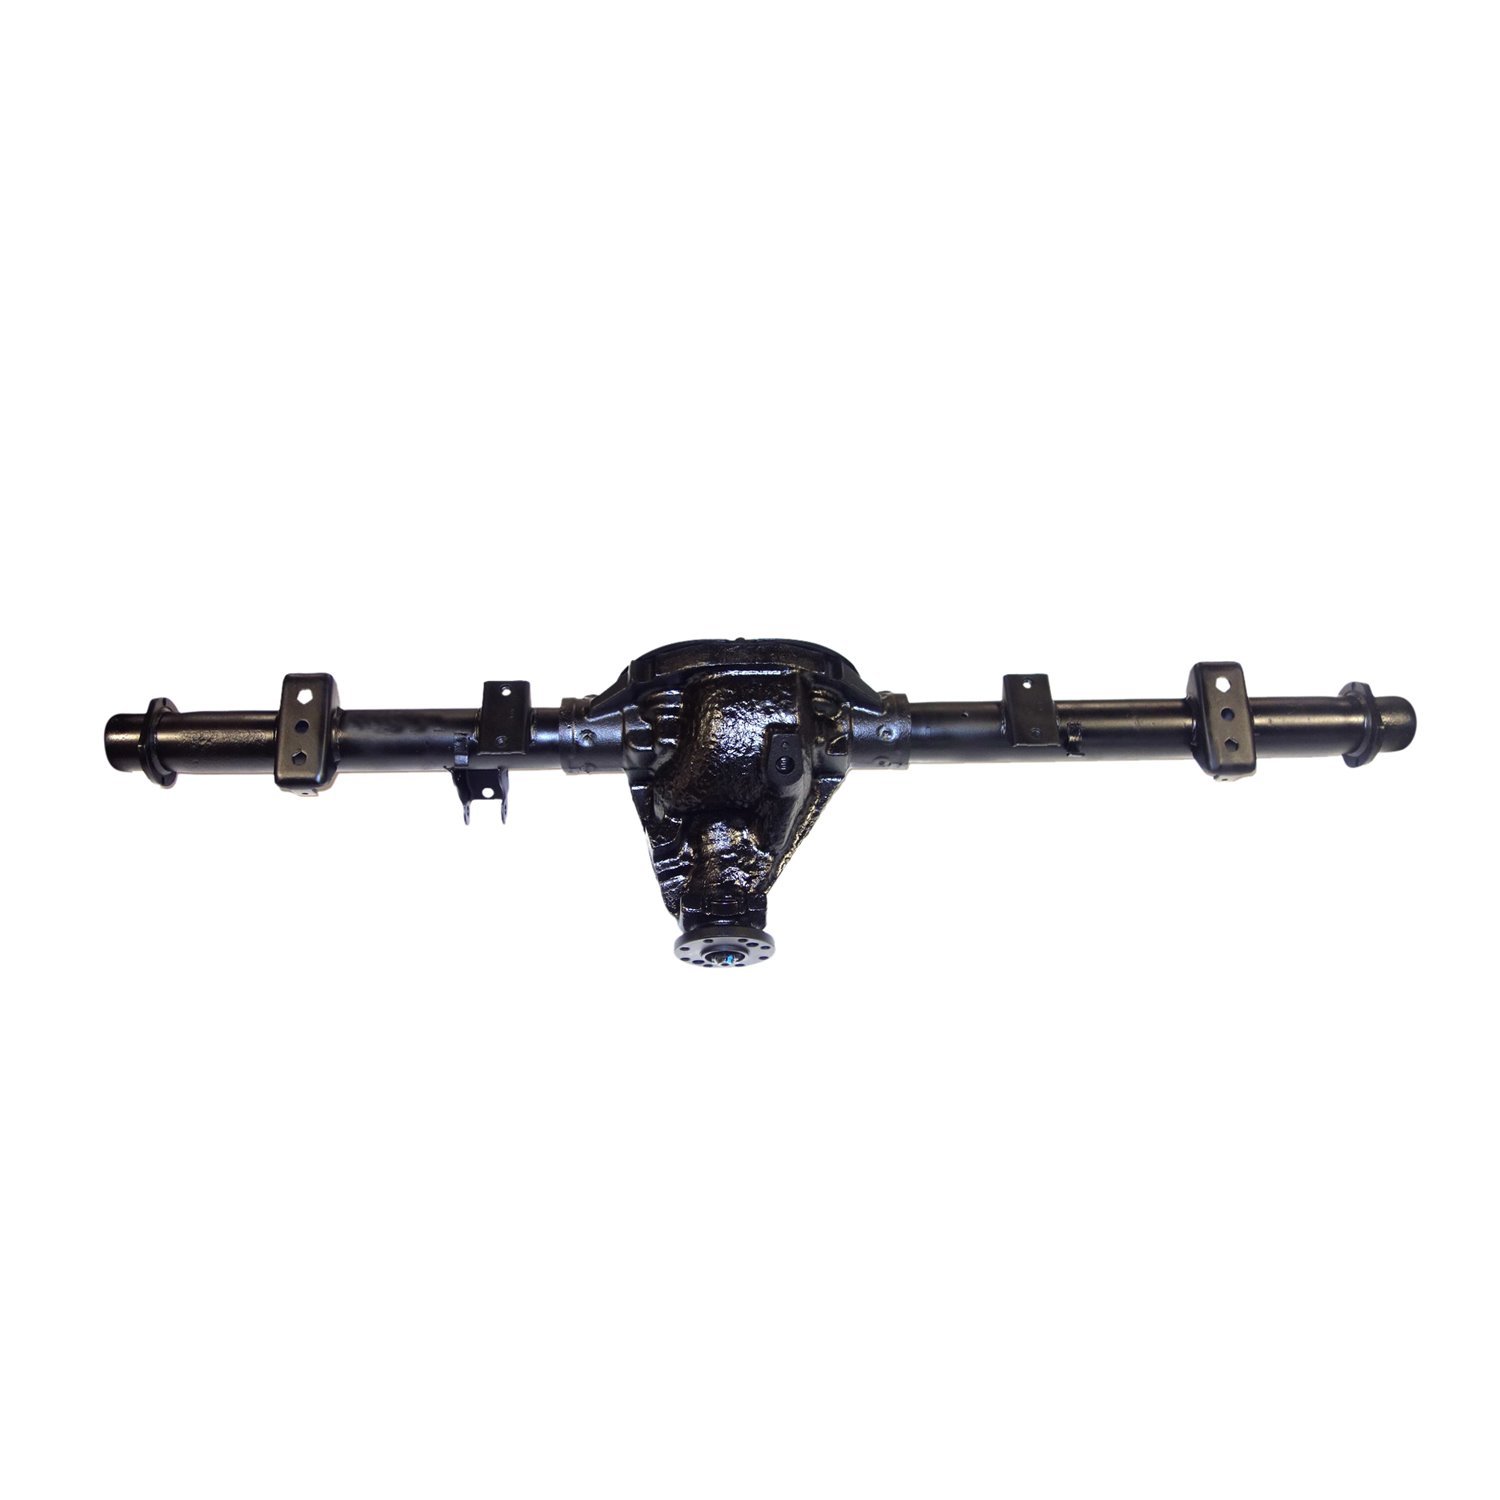 Remanufactured Complete Axle Assembly for Chrysler 8.25" 07-09 Aspen & Durango 3.55 Ratio